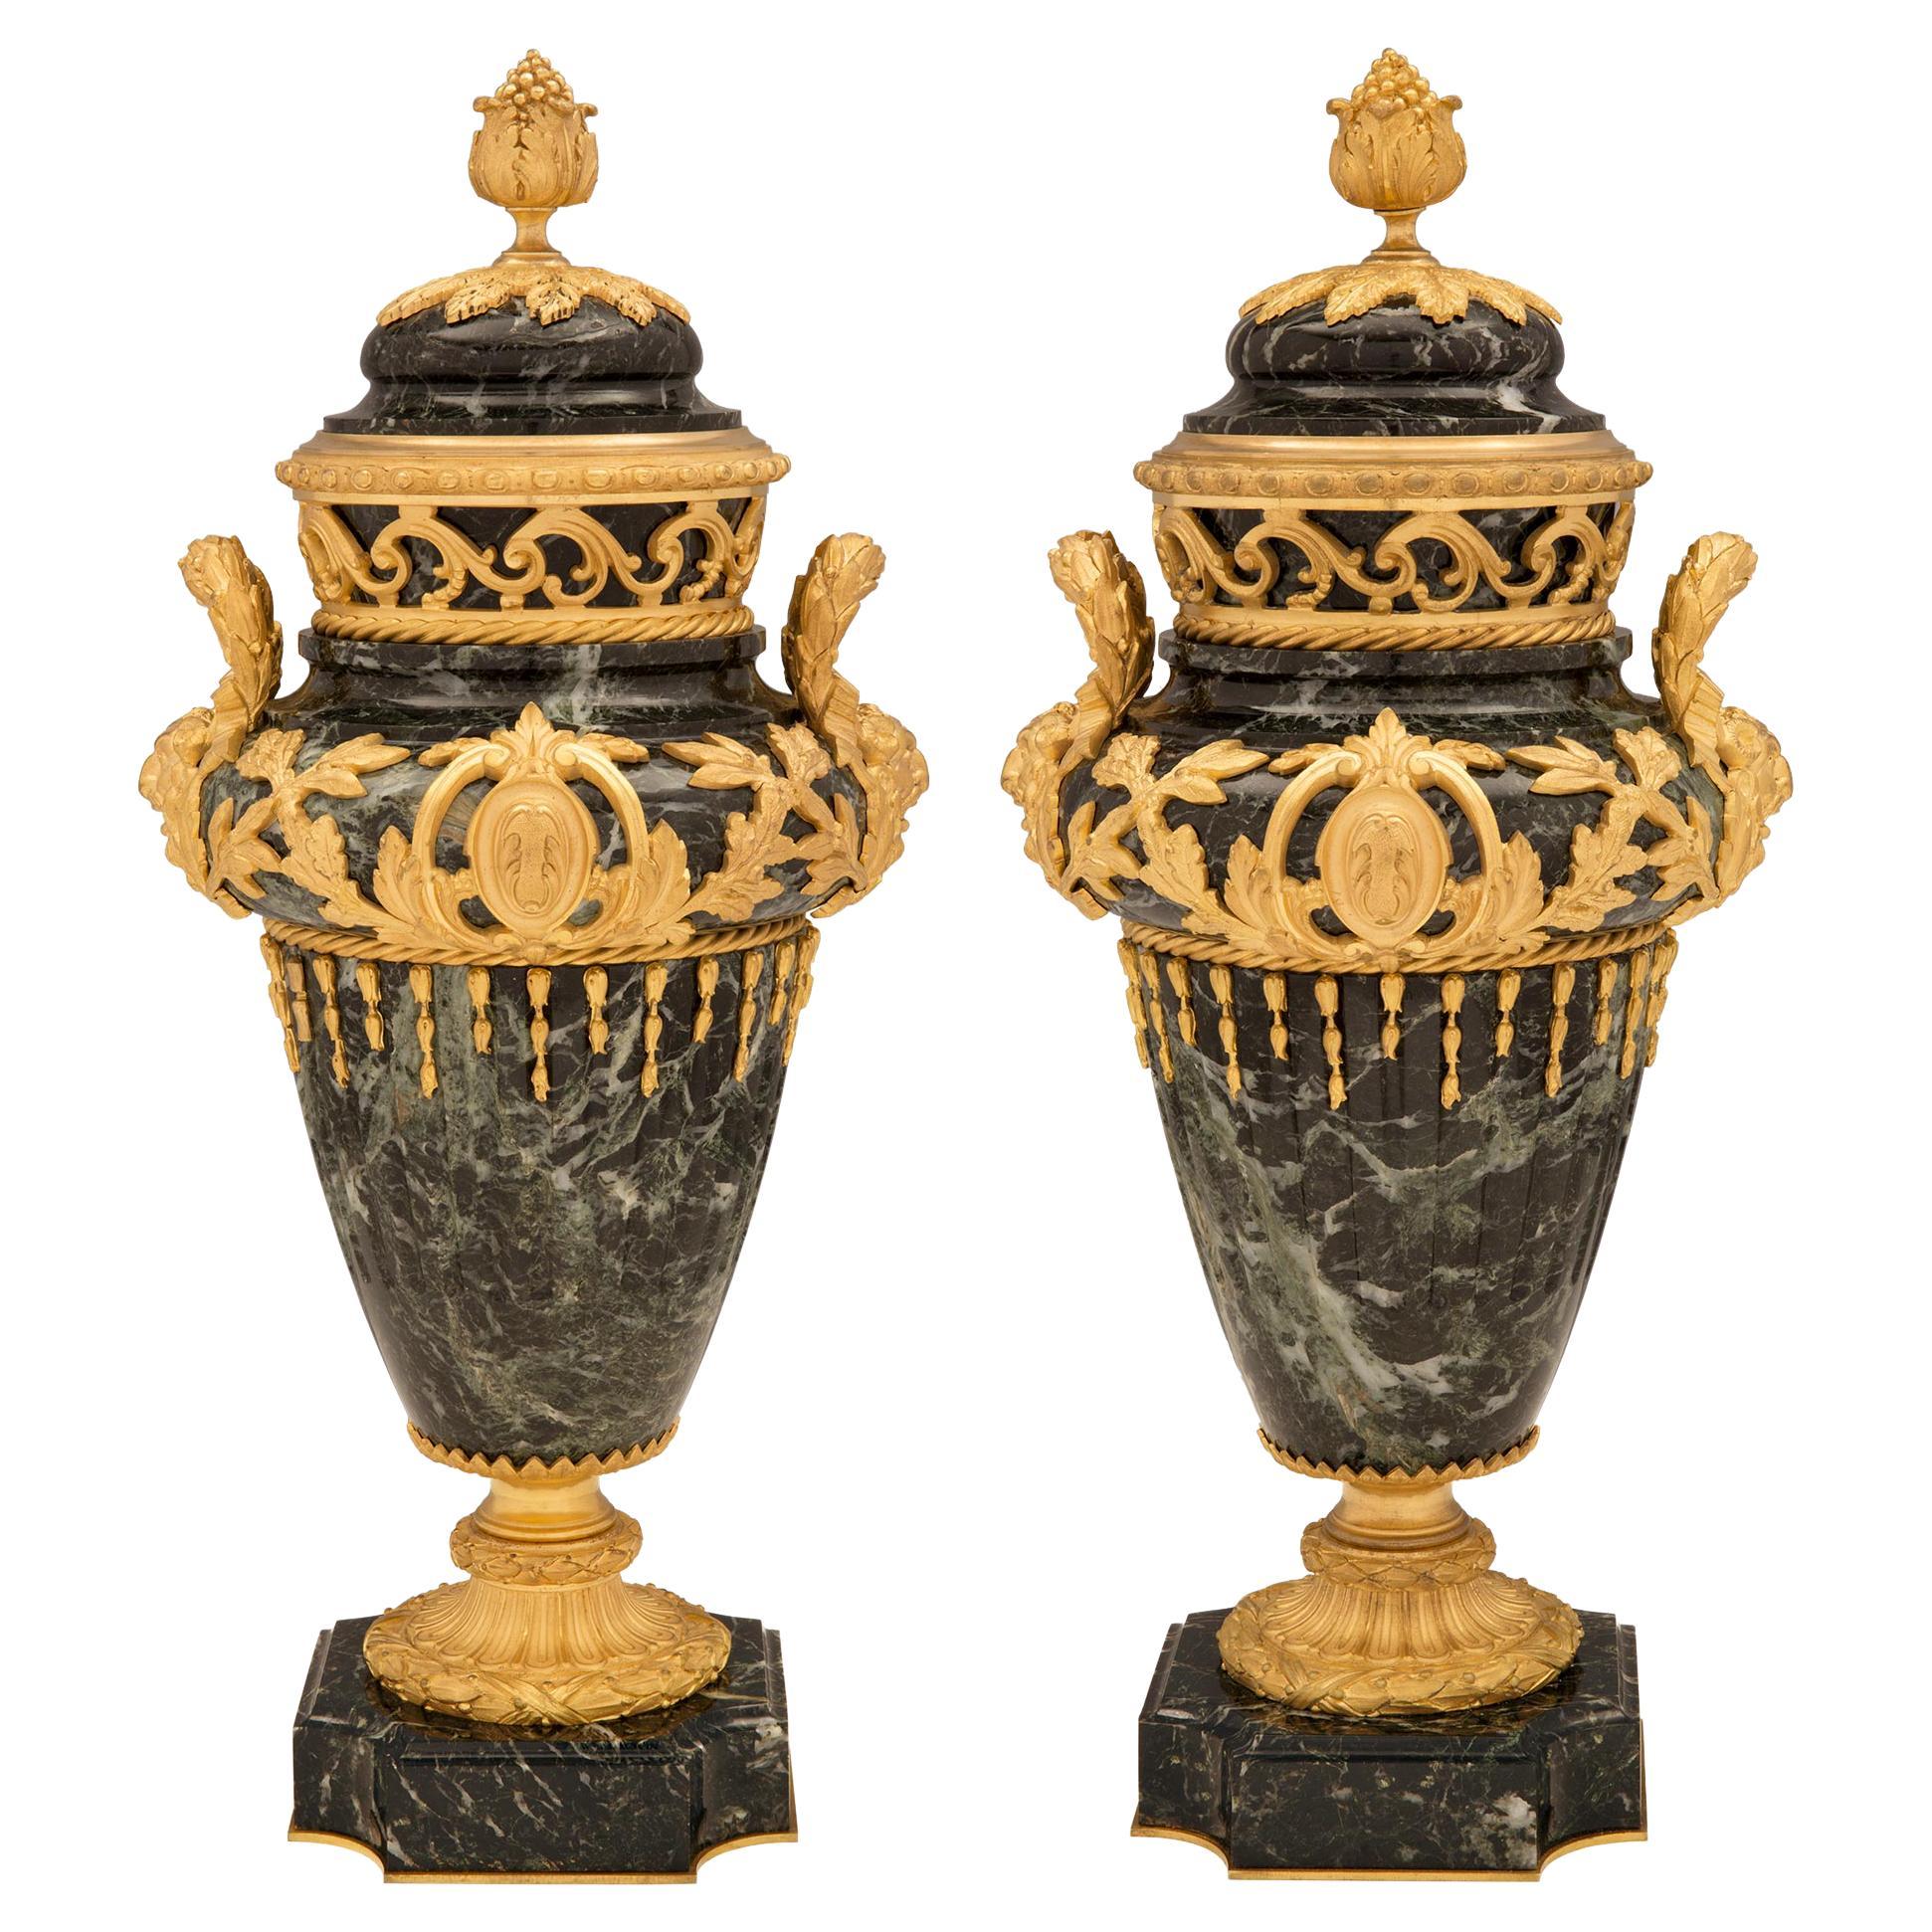 Pair of French 19th Century Vert de Patricia Marble and Ormolu Lidded Urns For Sale